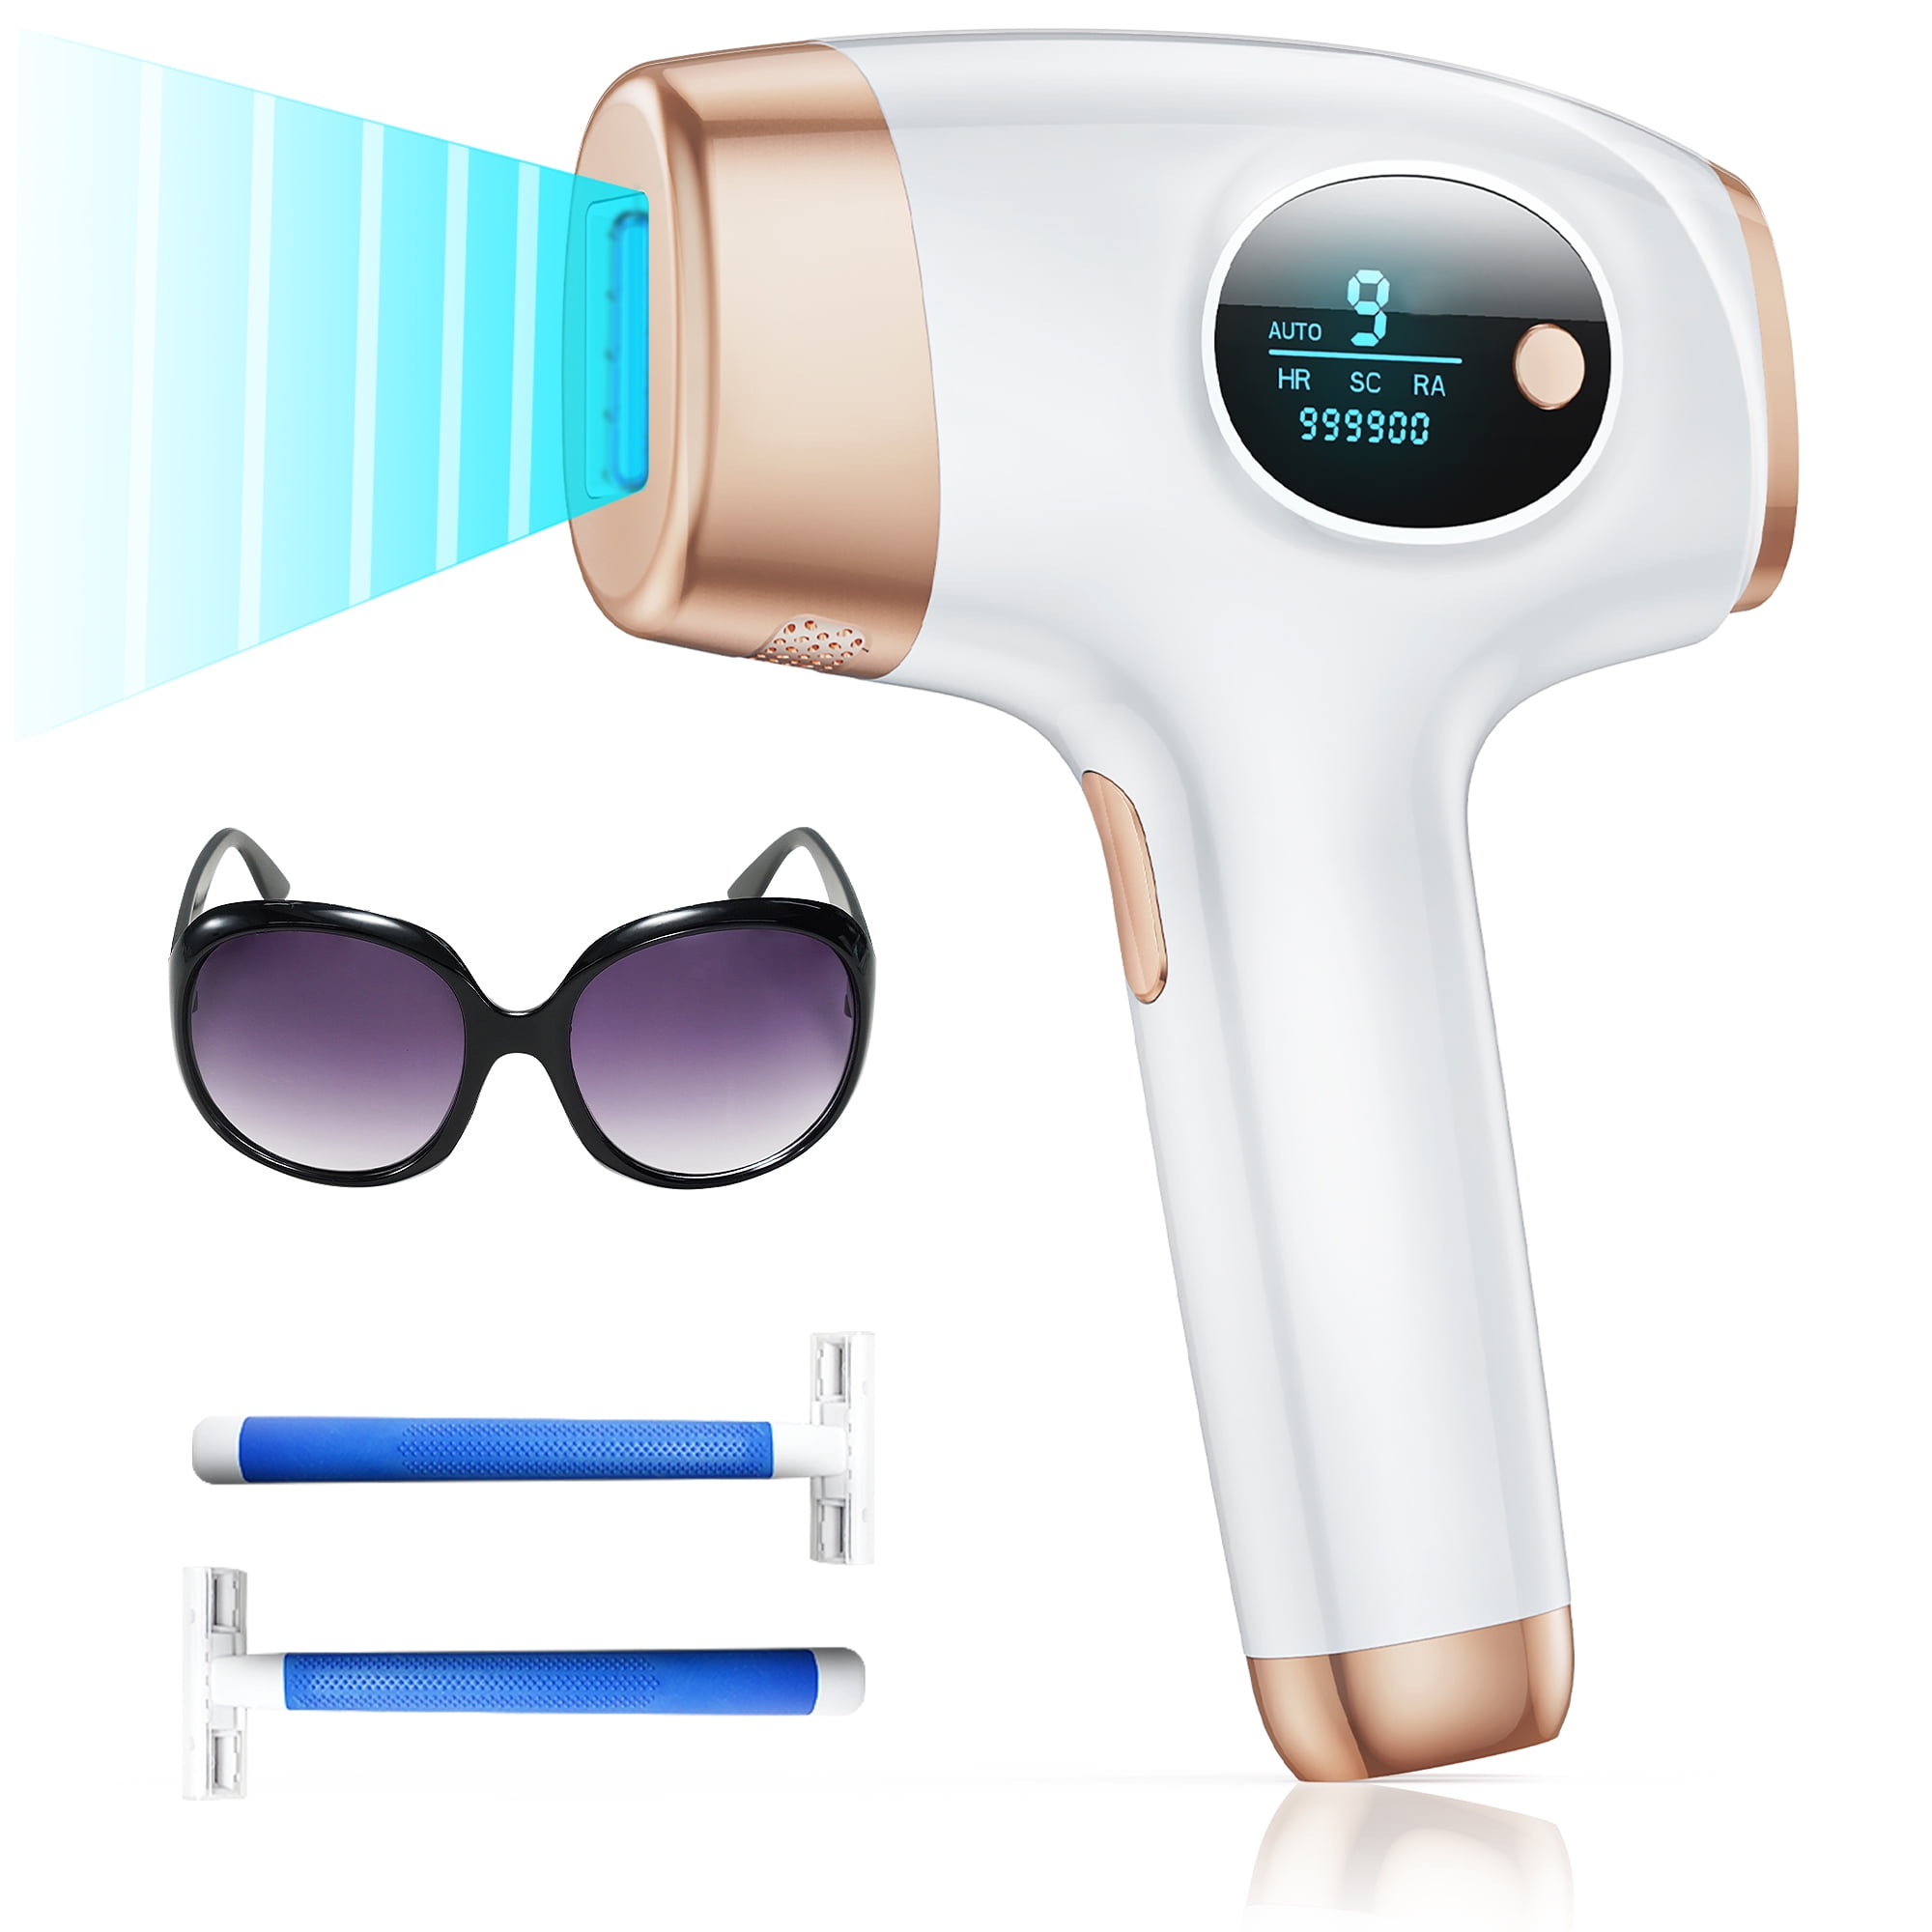 JOOYEE IPL Laser Permanent Hair Removal Upgraded to 999,900 Flashes IPL  Hair Removal Device for Whole Body